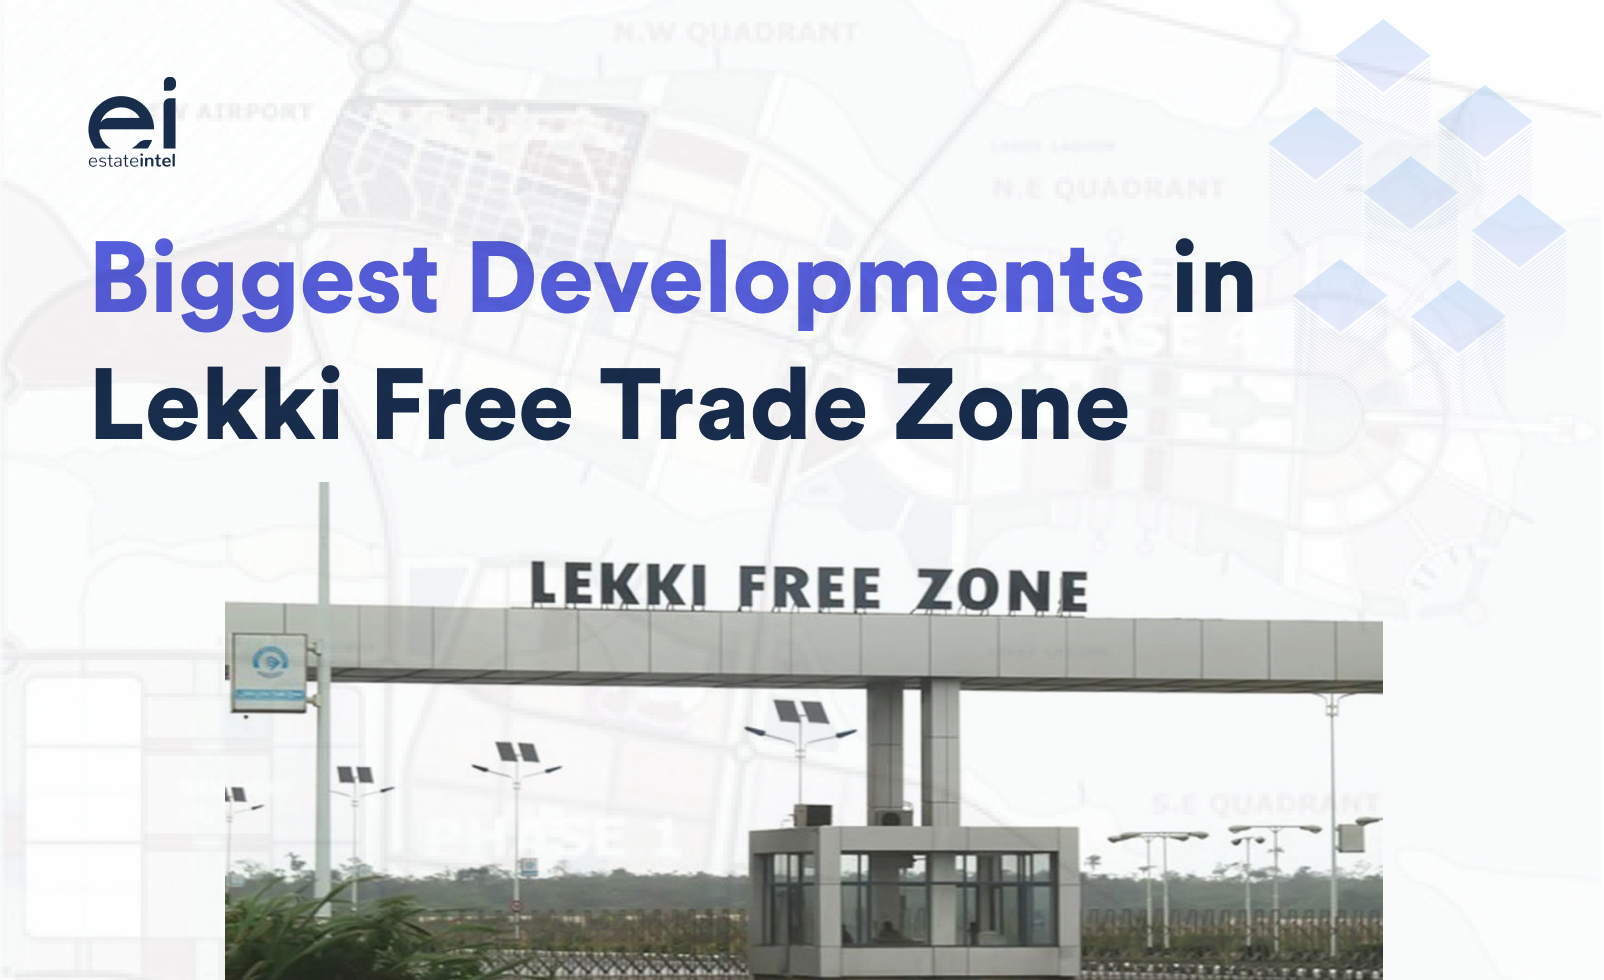 Here are the Largest Developments in Lekki Free Trade Zone